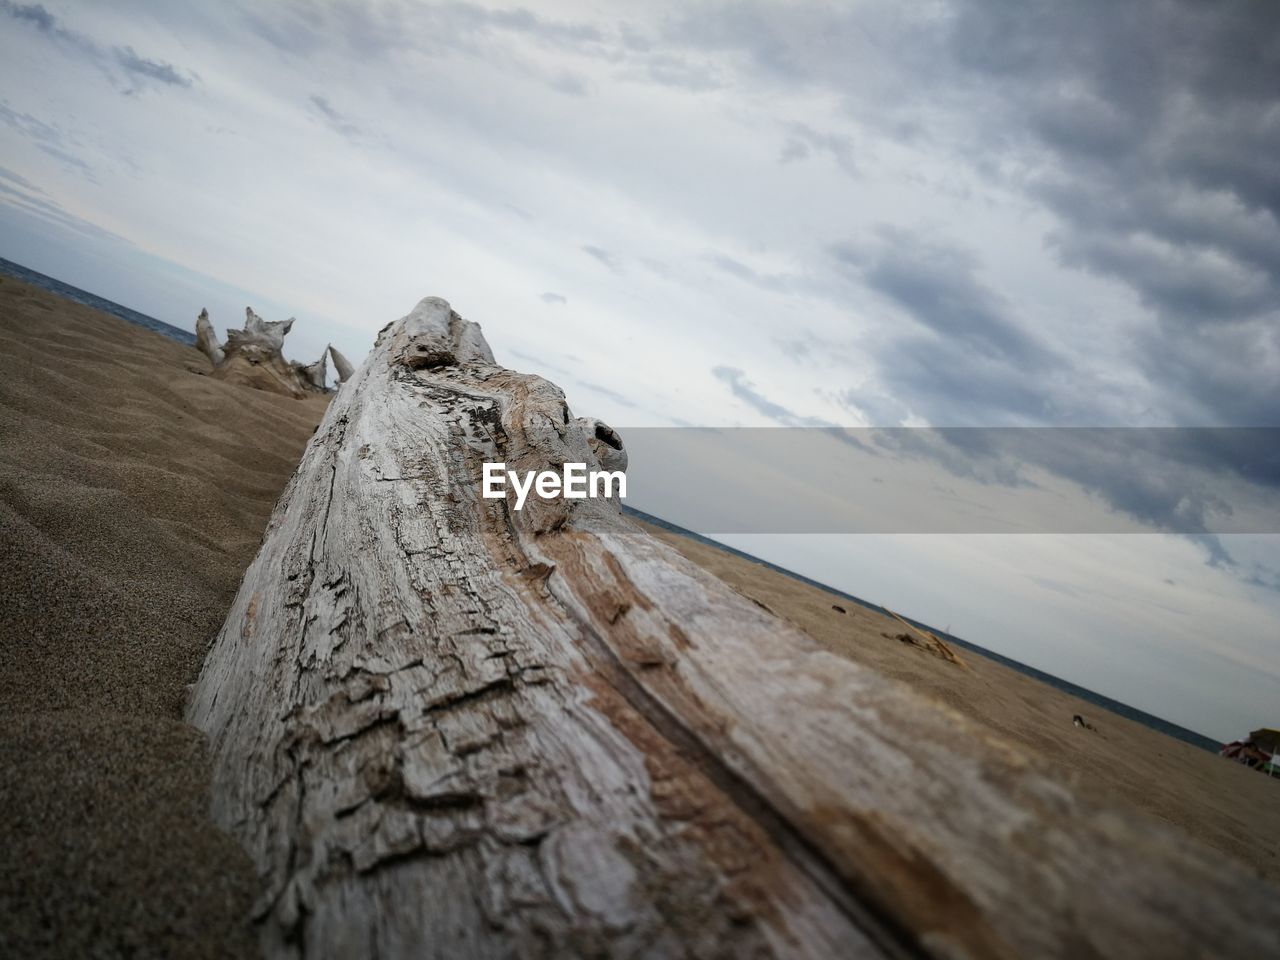 High angle view of driftwood at sandy beach against cloudy sky